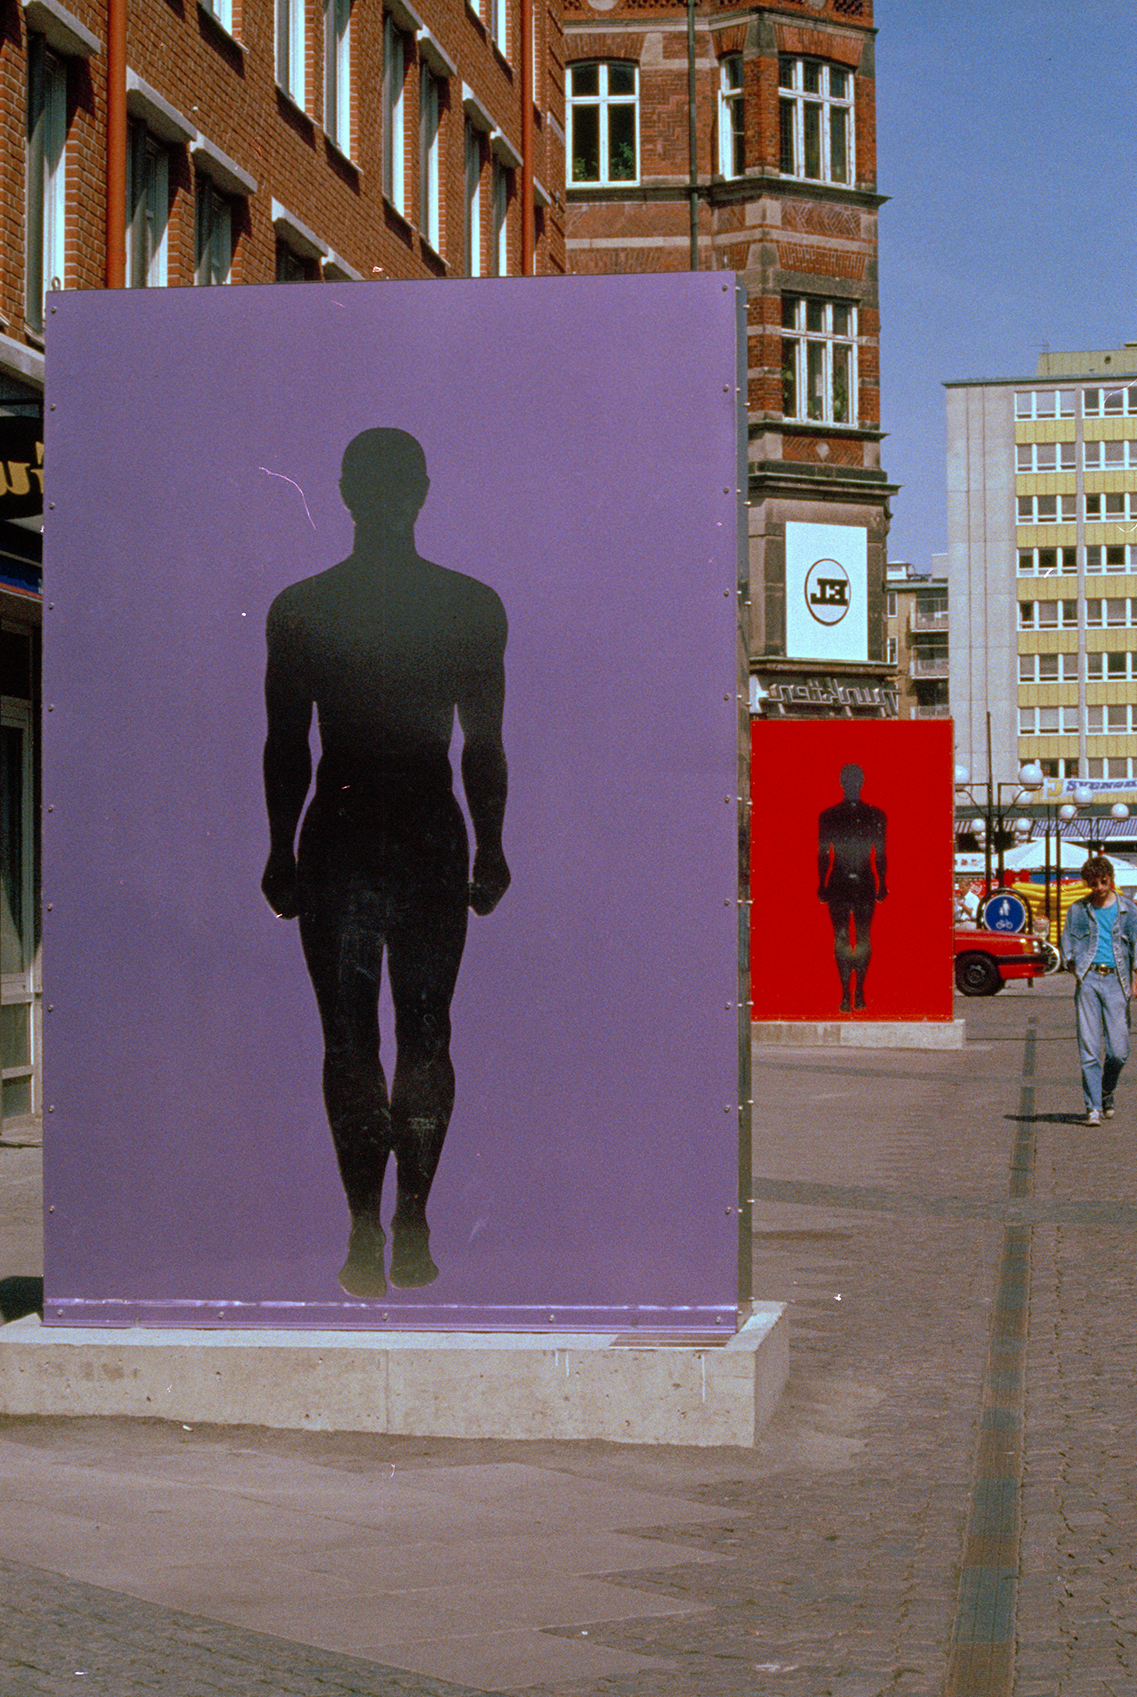 Two large artworks of a silhouette of a man in a city